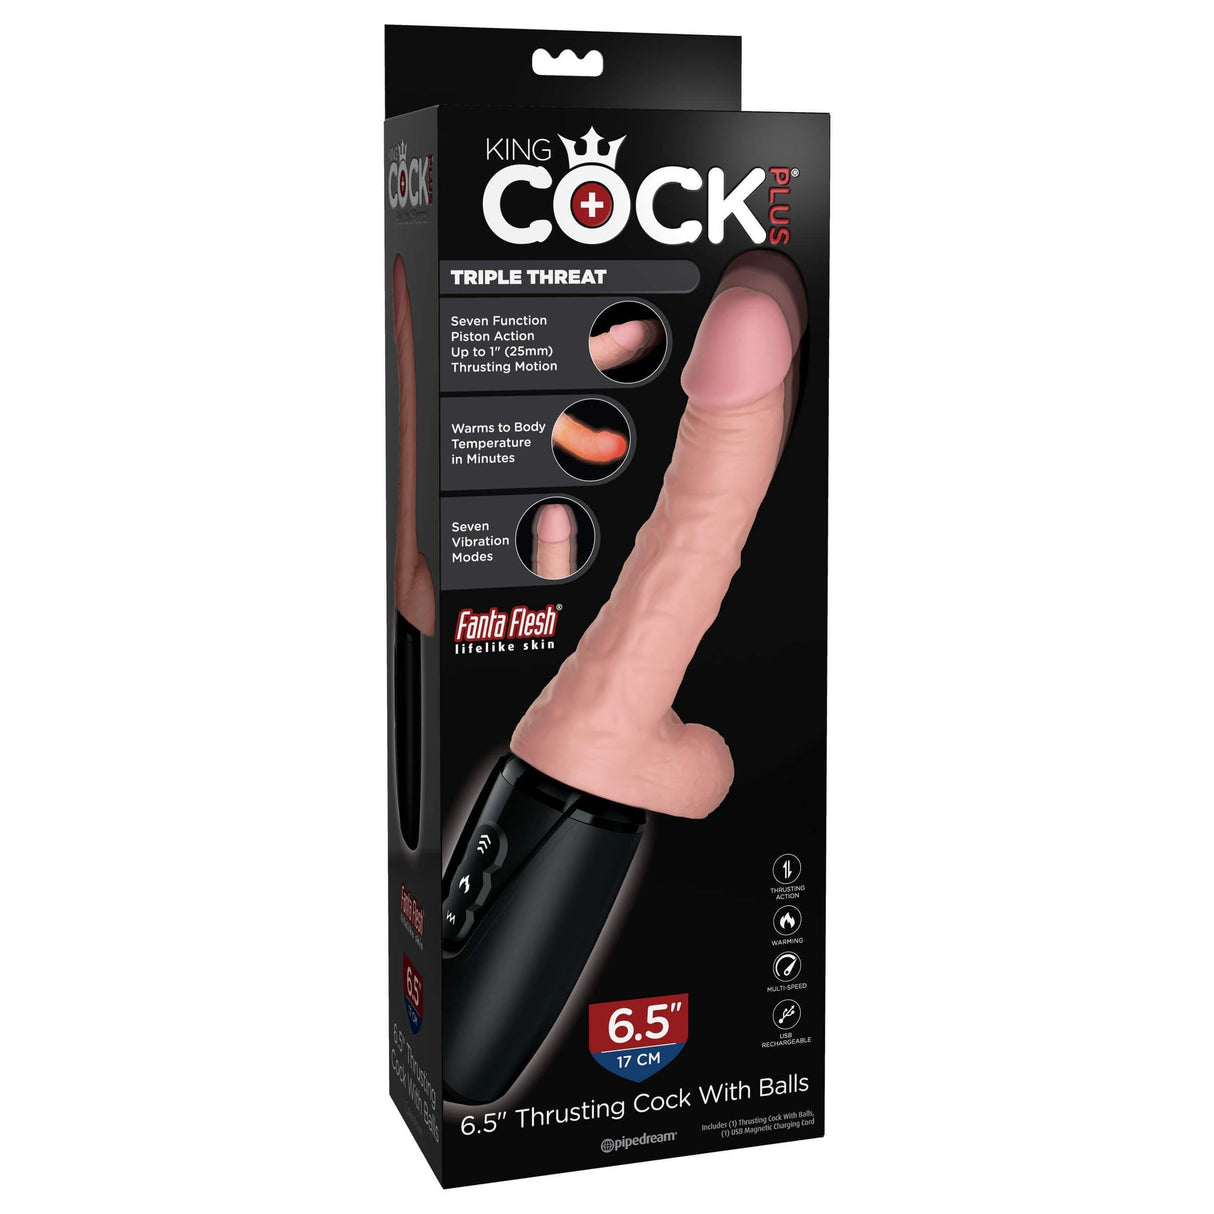 King Cock Plus 6.5 Inch Thrusting Cock with Balls